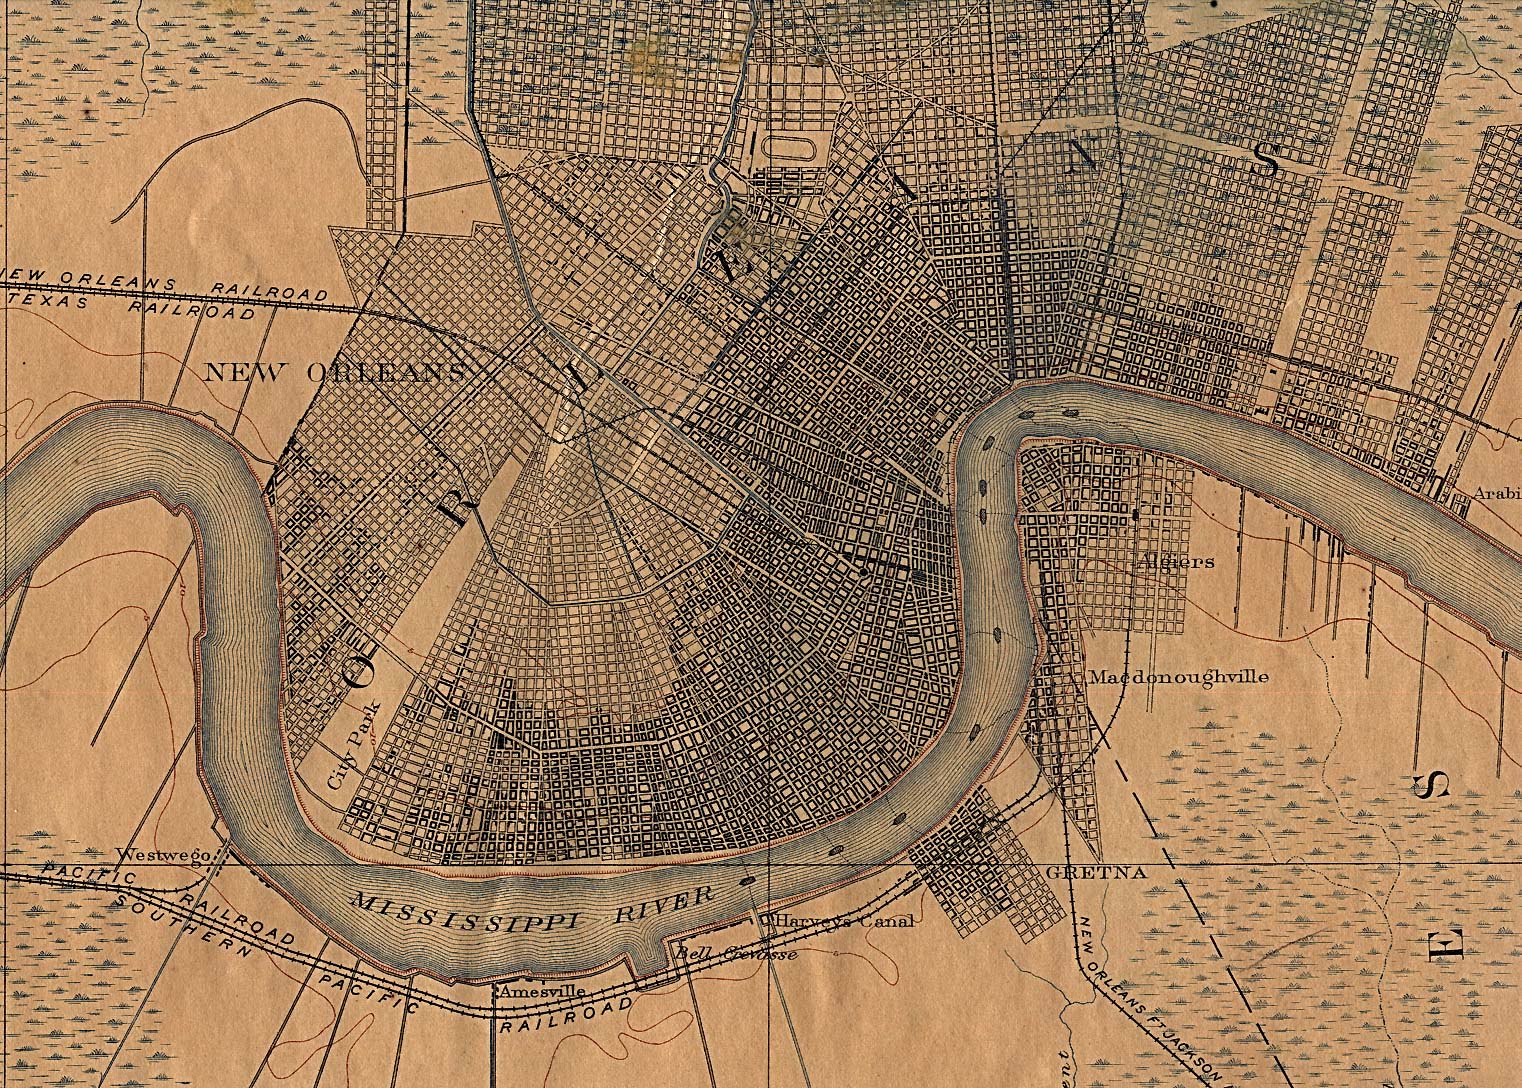 Historical Maps of U.S Cities. New Orleans, Louisiana 1891 U.S. Geological Survey (740K) 